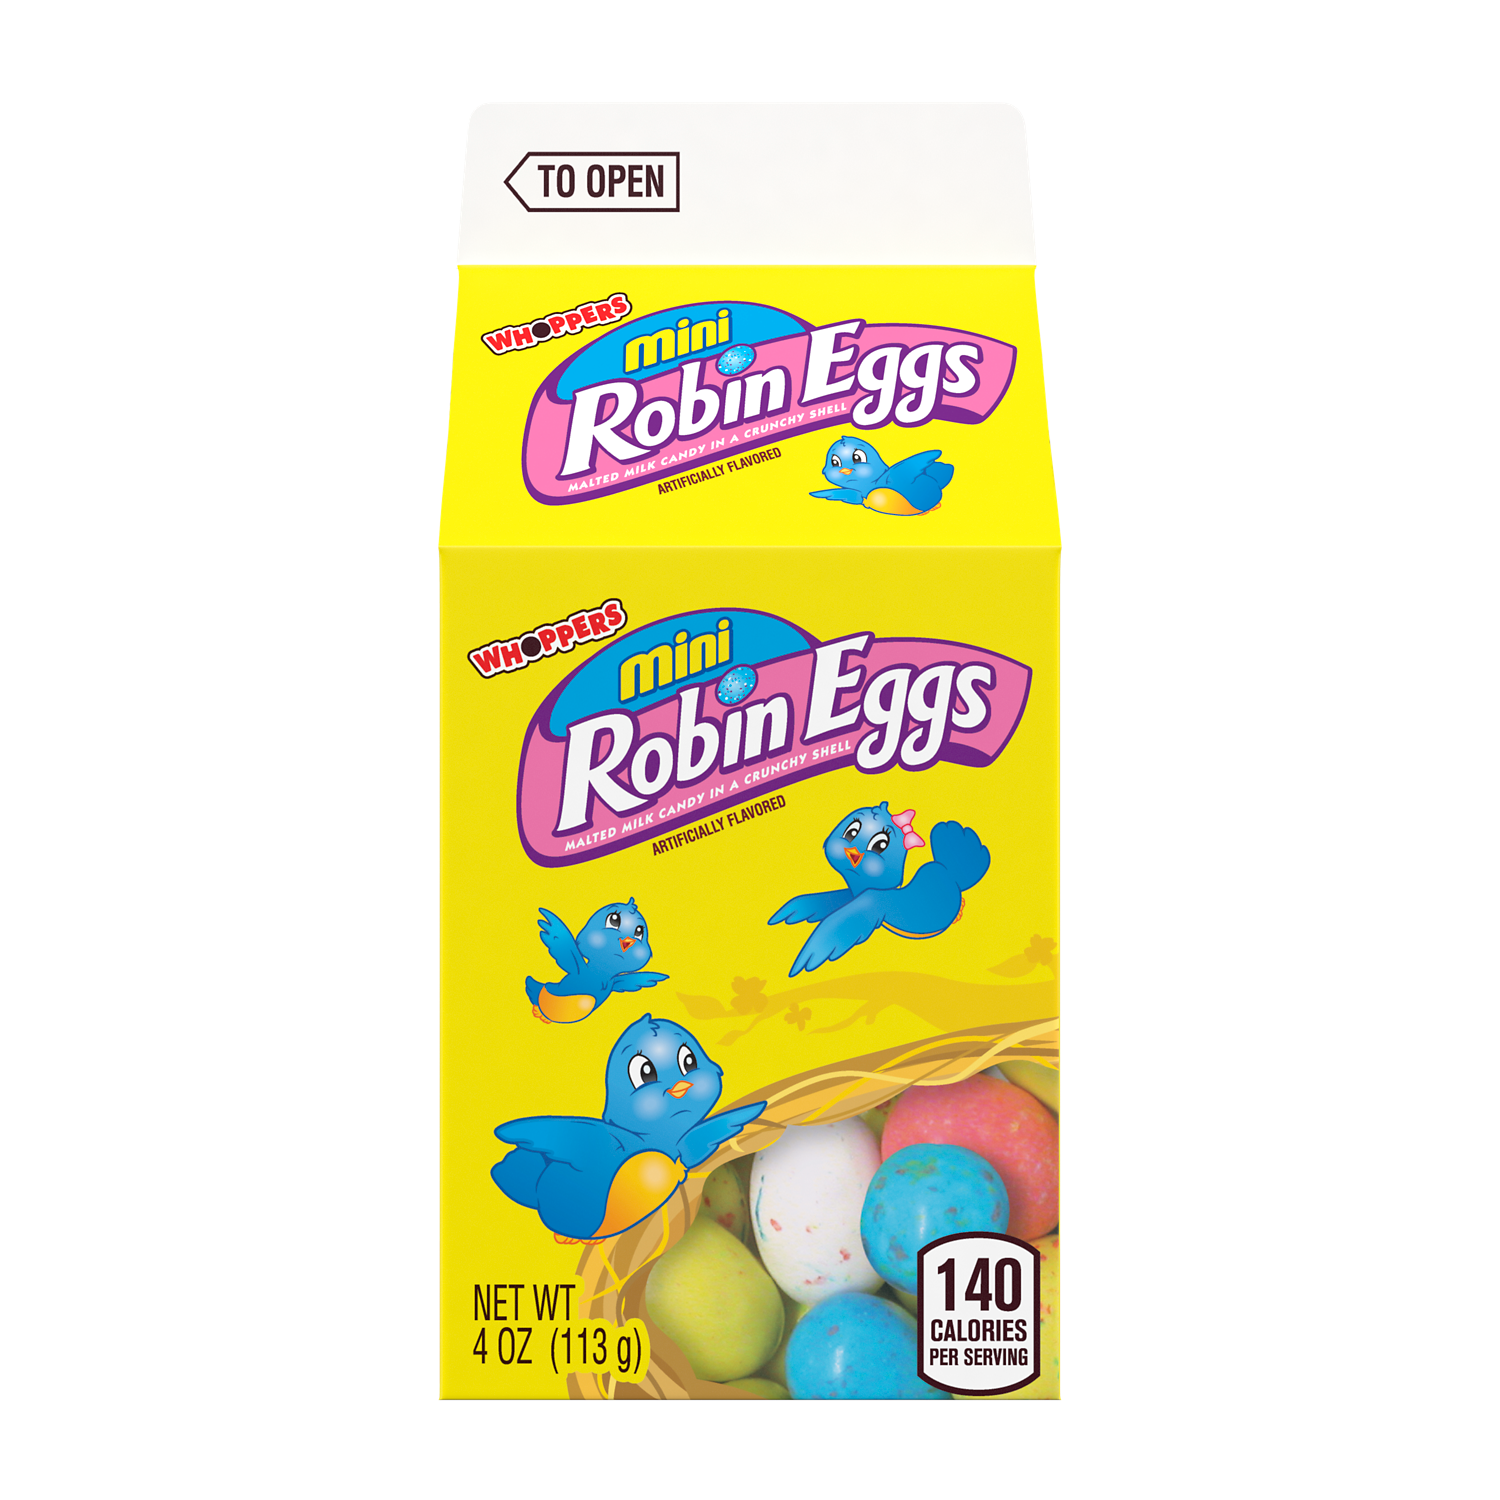 WHOPPERS ROBIN EGGS Mini Malted Milk Balls, 4 oz carton - Front of Package